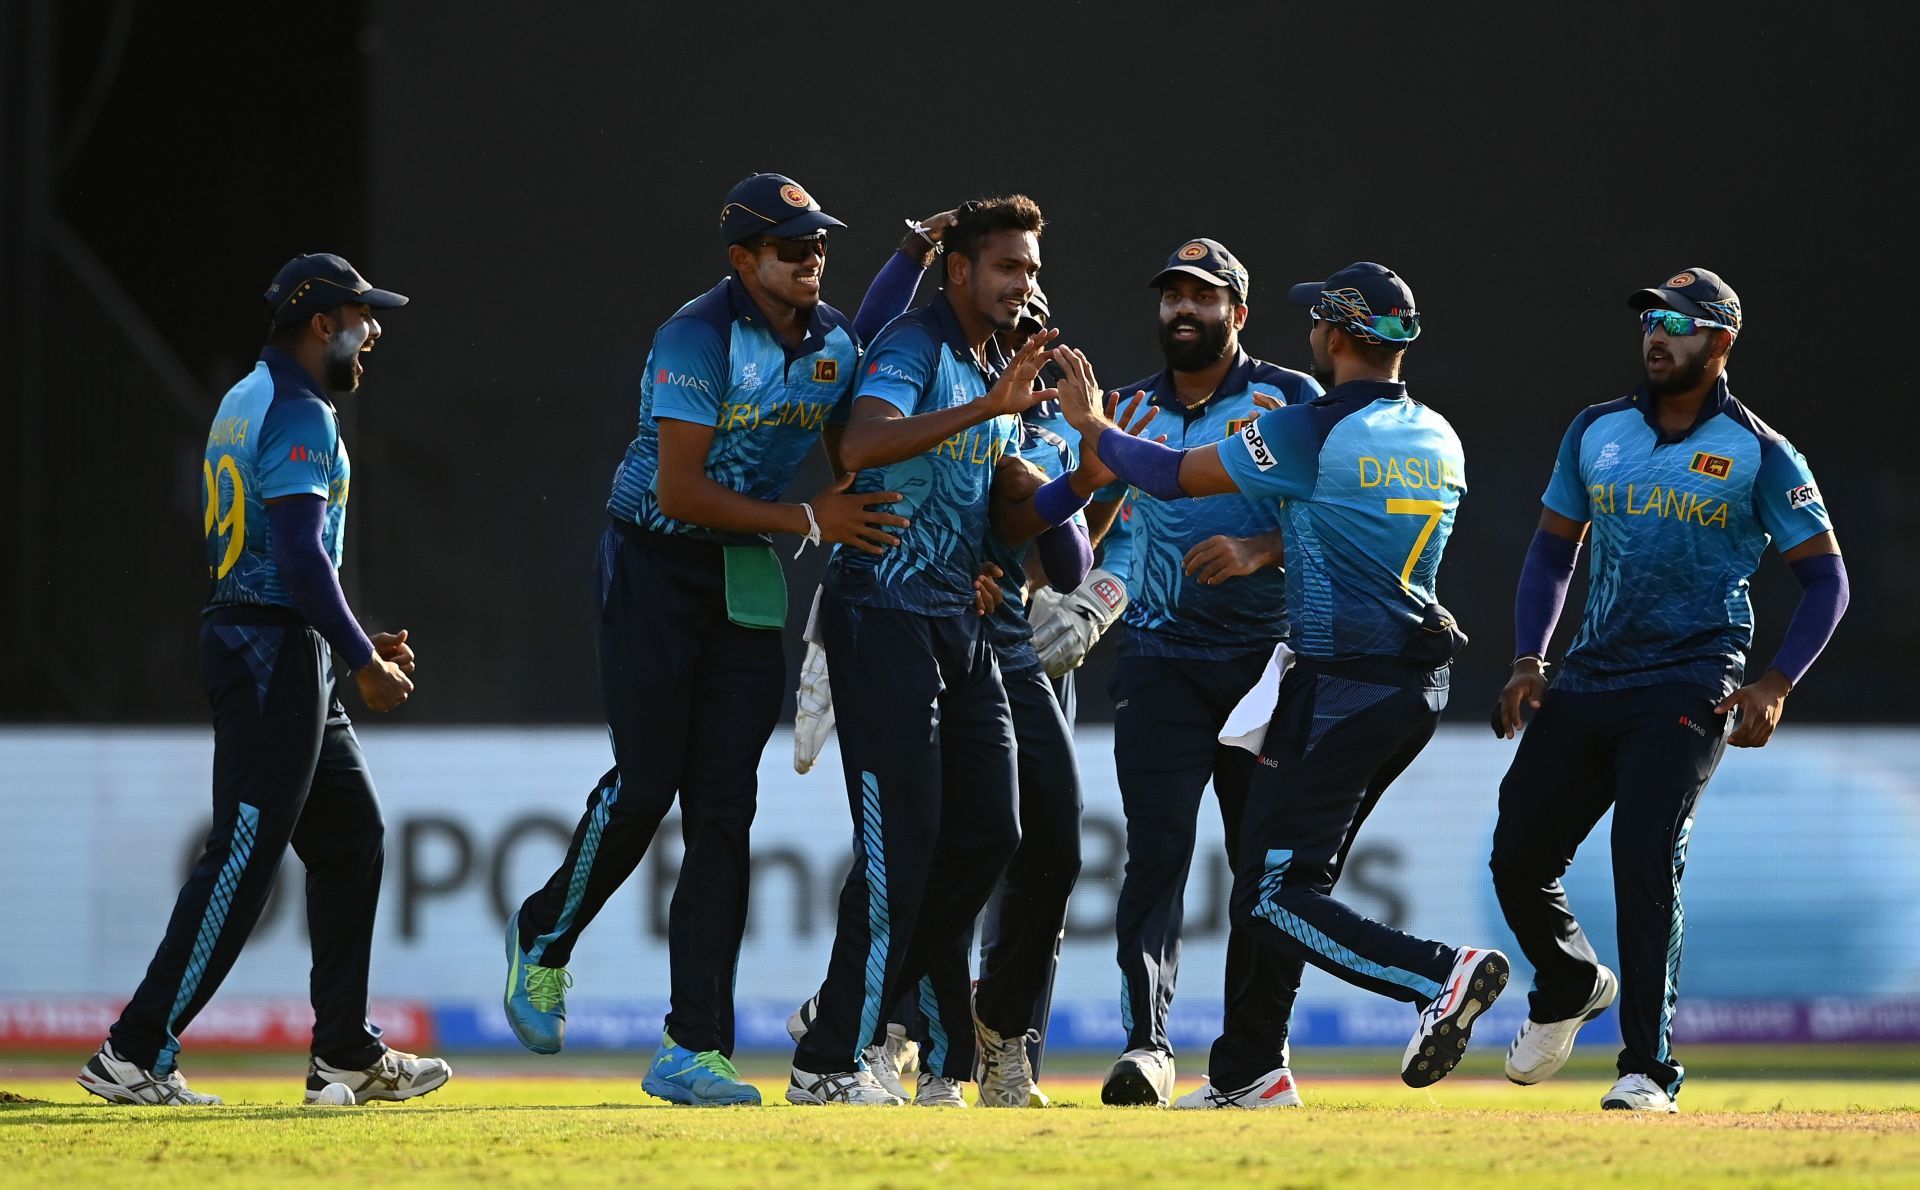 Sri Lanka will play 5 T20Is in Australia before touring India